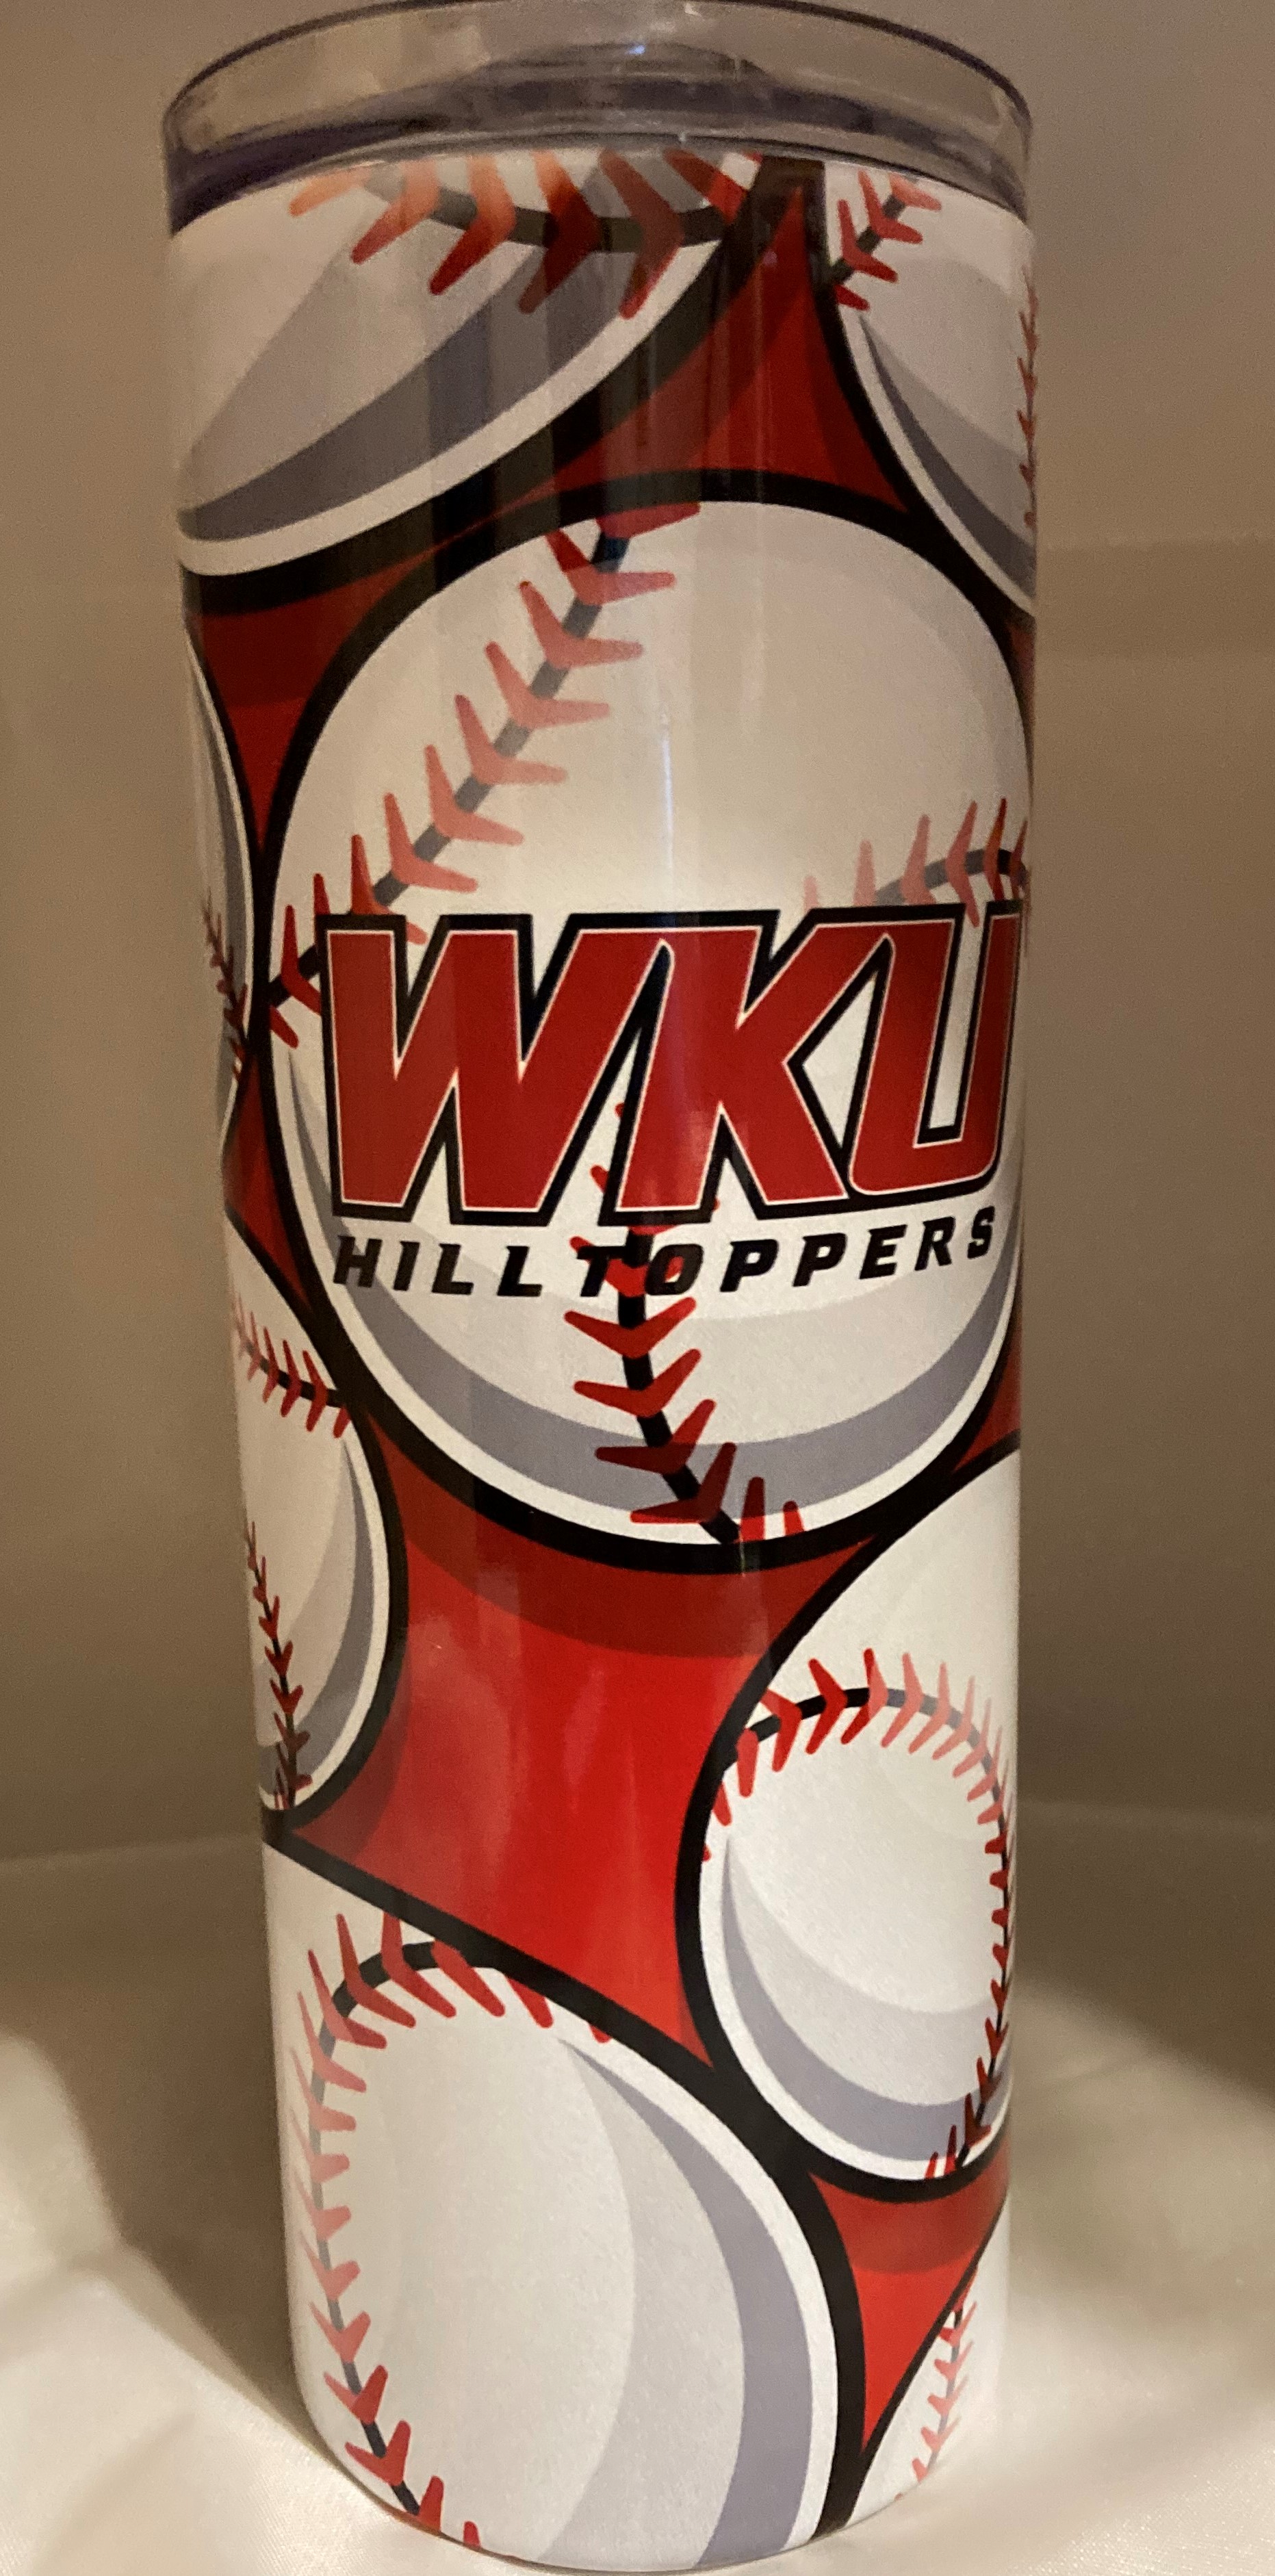 20 oz Tumbler Fun made with sublimation printing